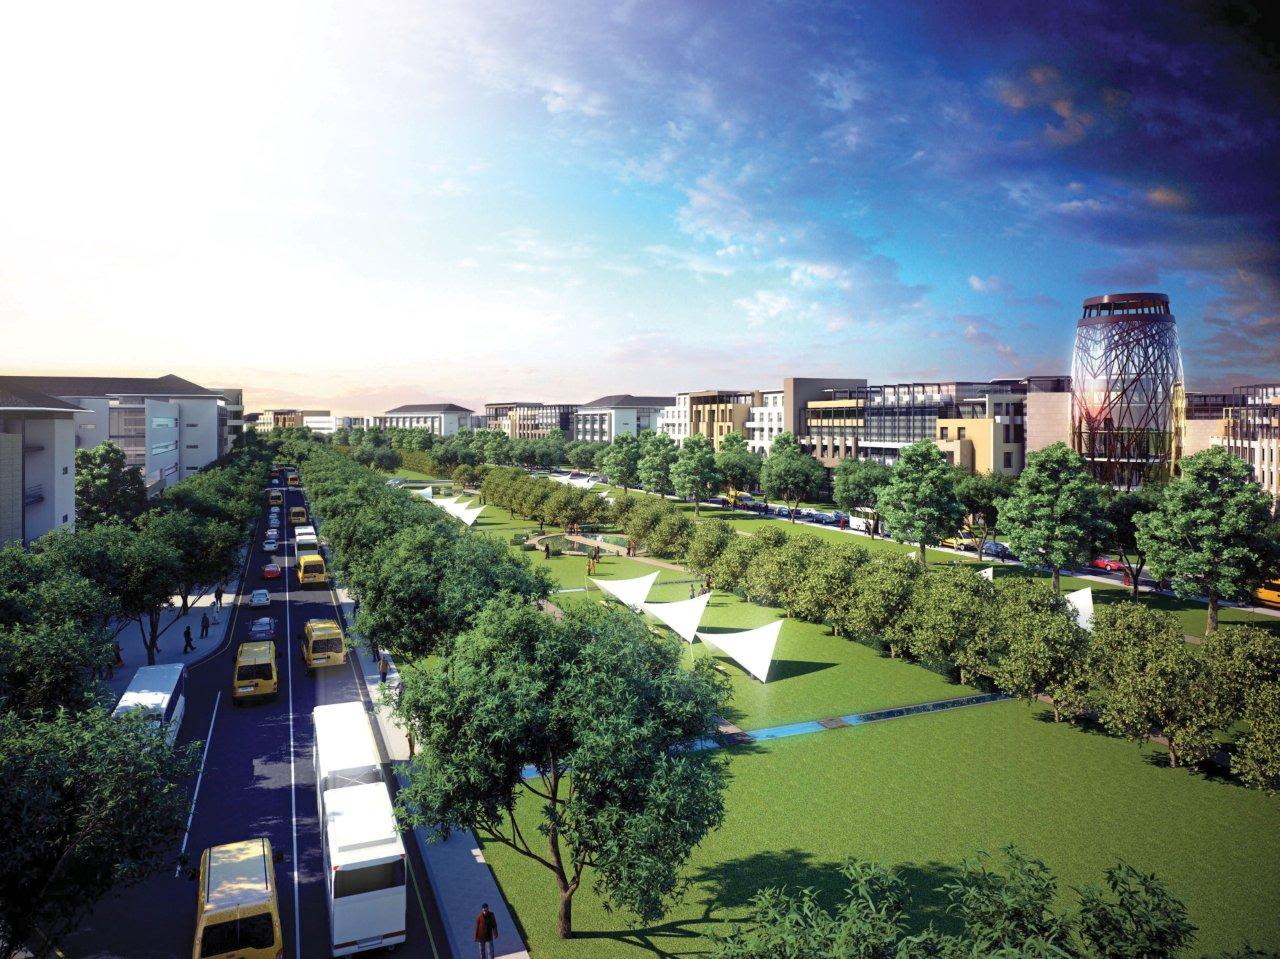 A new mixed-use development for more than 150,000 residents, Tatu City was initiated by Rendeavour, "Africa's largest property developer." It's a 5,000 acre mixed-use development with schools, homes, sports facilities and green spaces. 